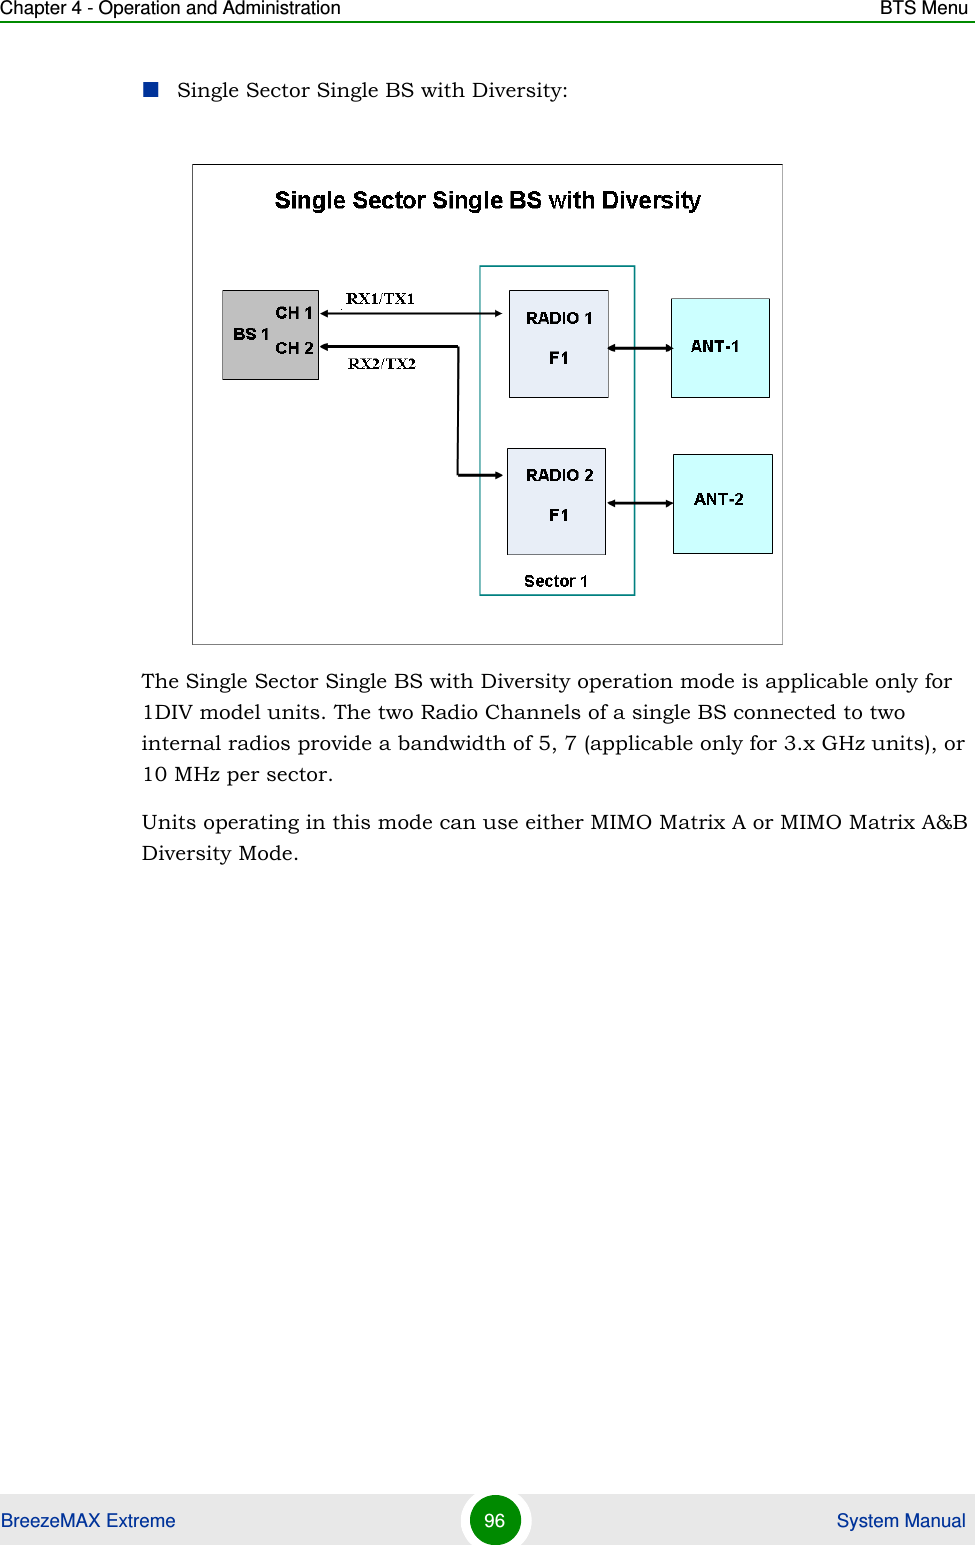 Chapter 4 - Operation and Administration BTS MenuBreezeMAX Extreme 96  System ManualSingle Sector Single BS with Diversity:The Single Sector Single BS with Diversity operation mode is applicable only for 1DIV model units. The two Radio Channels of a single BS connected to two internal radios provide a bandwidth of 5, 7 (applicable only for 3.x GHz units), or 10 MHz per sector.Units operating in this mode can use either MIMO Matrix A or MIMO Matrix A&amp;B Diversity Mode. 